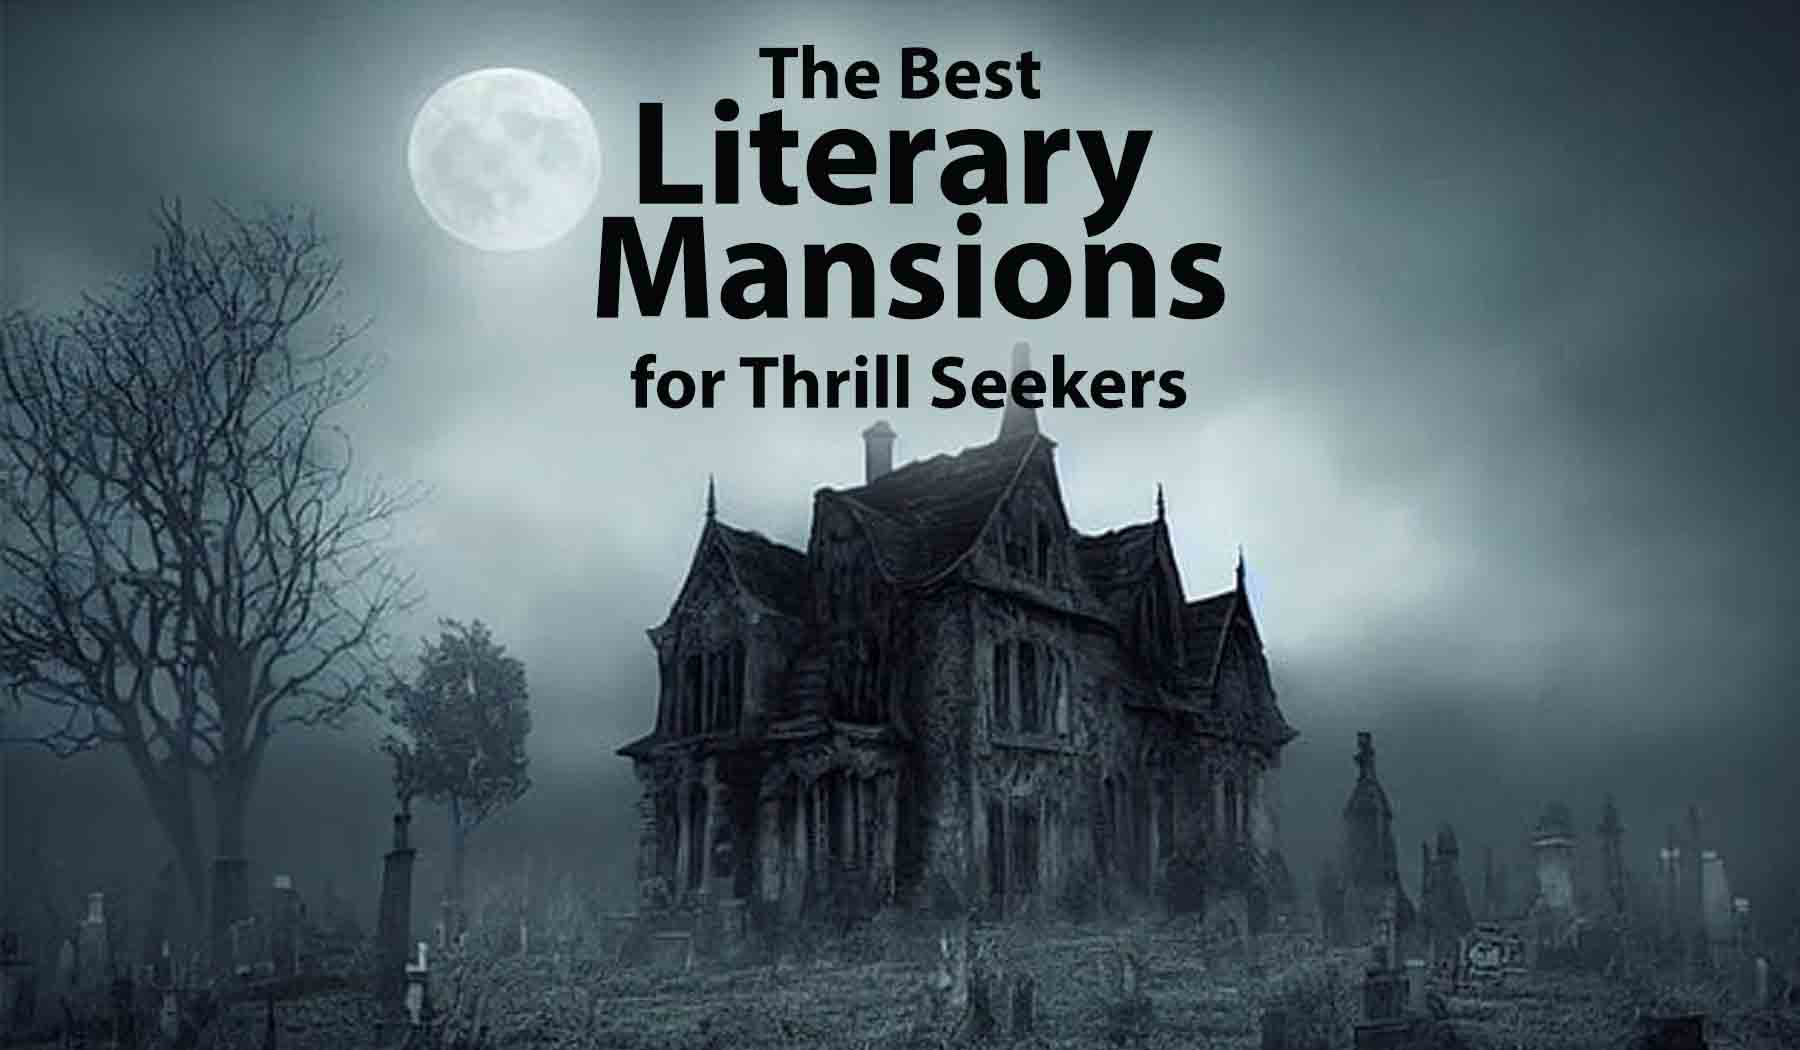 Best Literary Mansions for Thrill Seekers